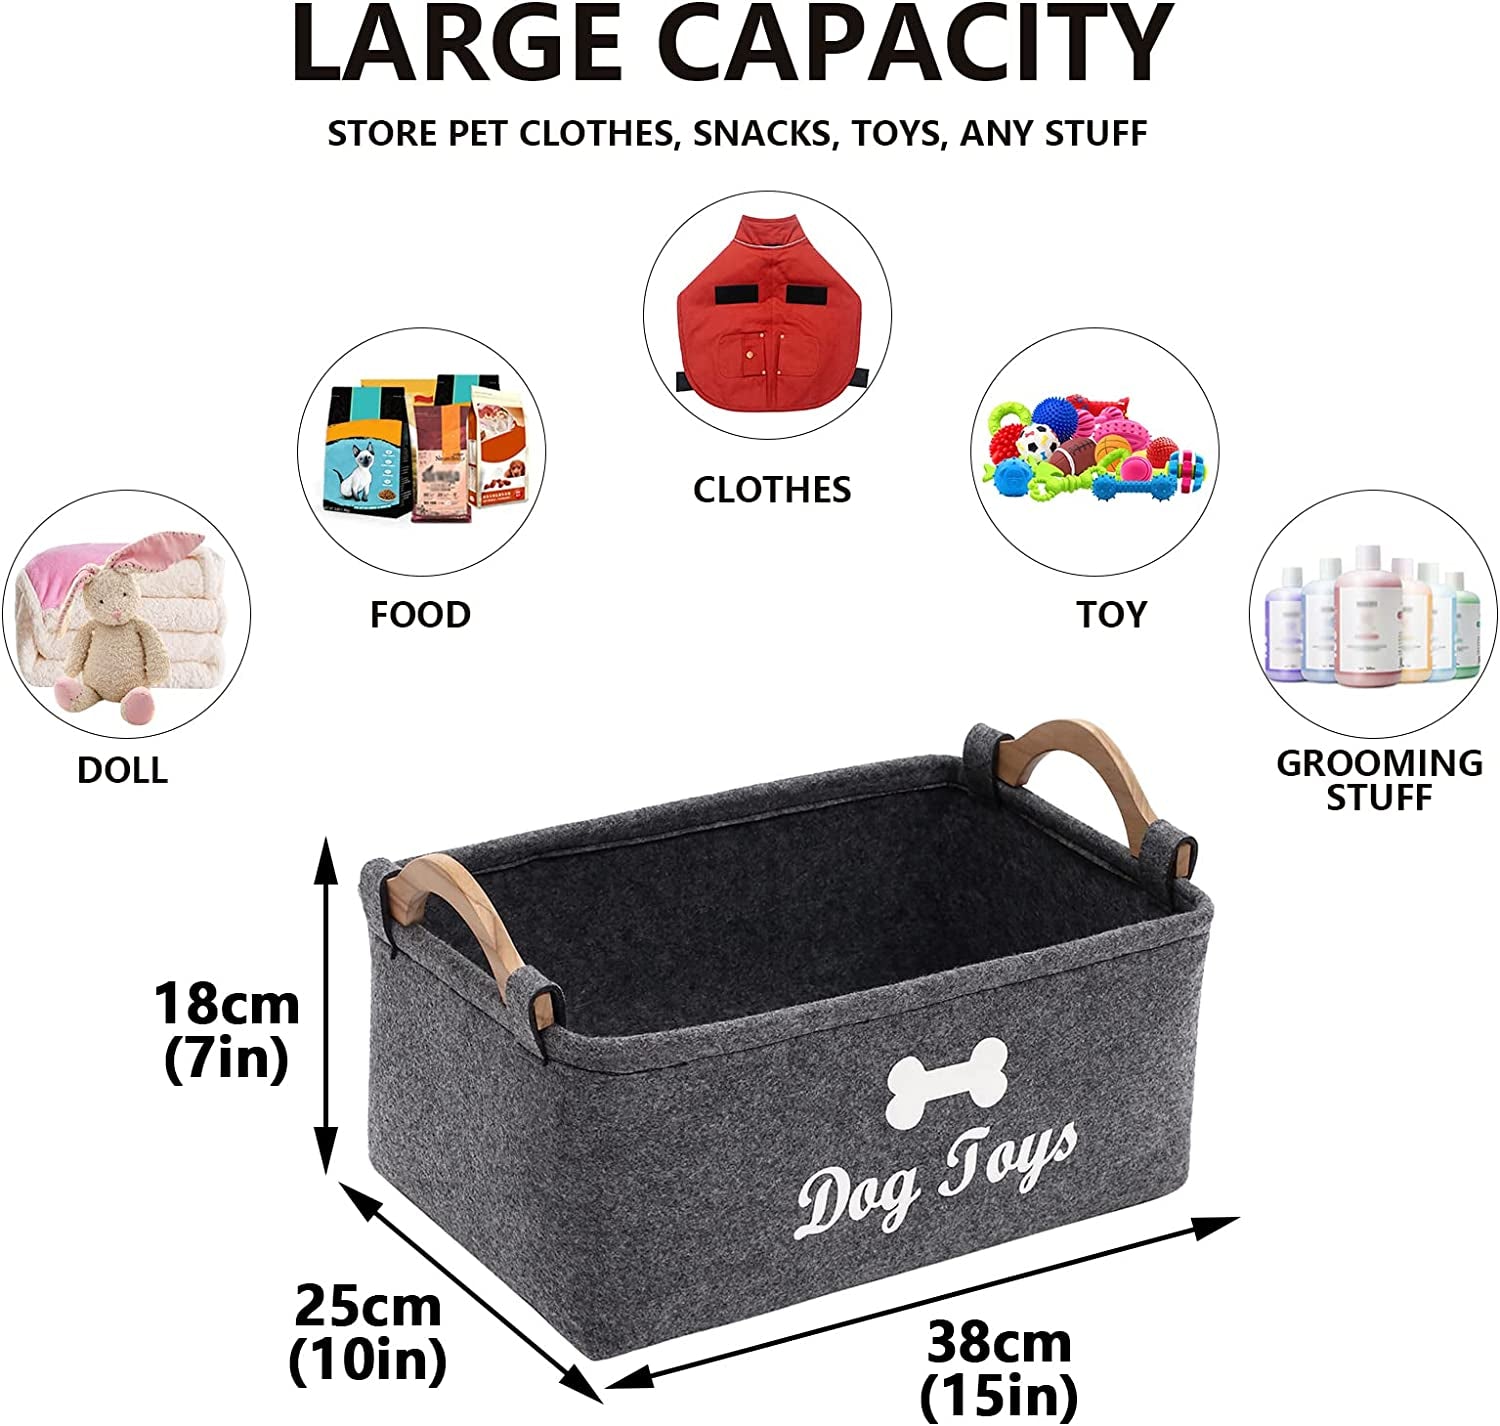 Felt Pet Toy Box and Dog Toy Box Storage Basket Chest Organizer - Perfect for Organizing Pet Toys, Blankets, Leashes and Food - Dog Toy - Grey